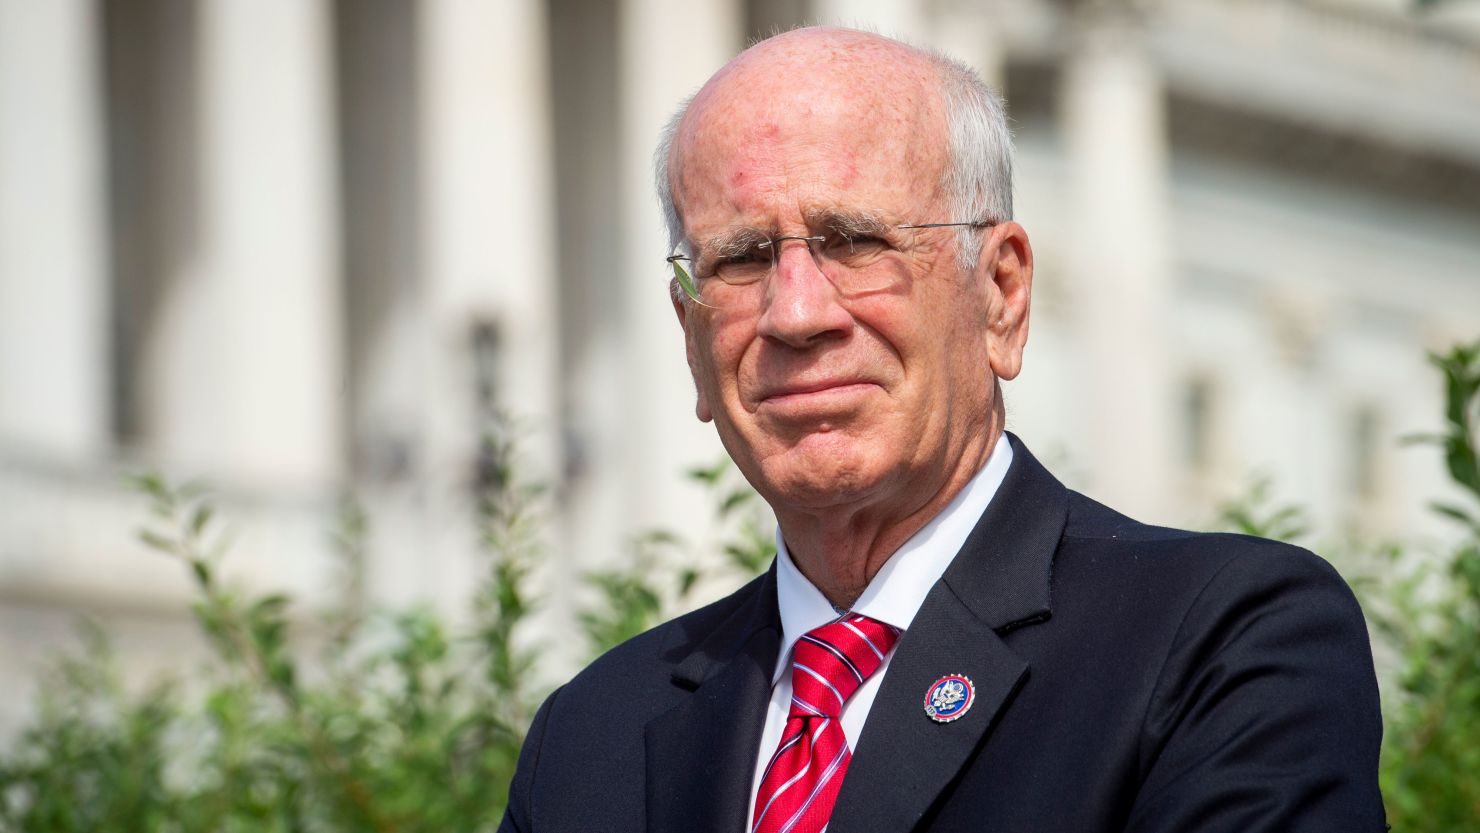 United States Representative Peter Welch (Democrat of Vermont) attends a press conference to introduce the Two-State Solution Act, at the US Capitol in Washington, DC, Thursday, September 23, 2021. Credit: Rod Lamkey / CNP/Sipa USA